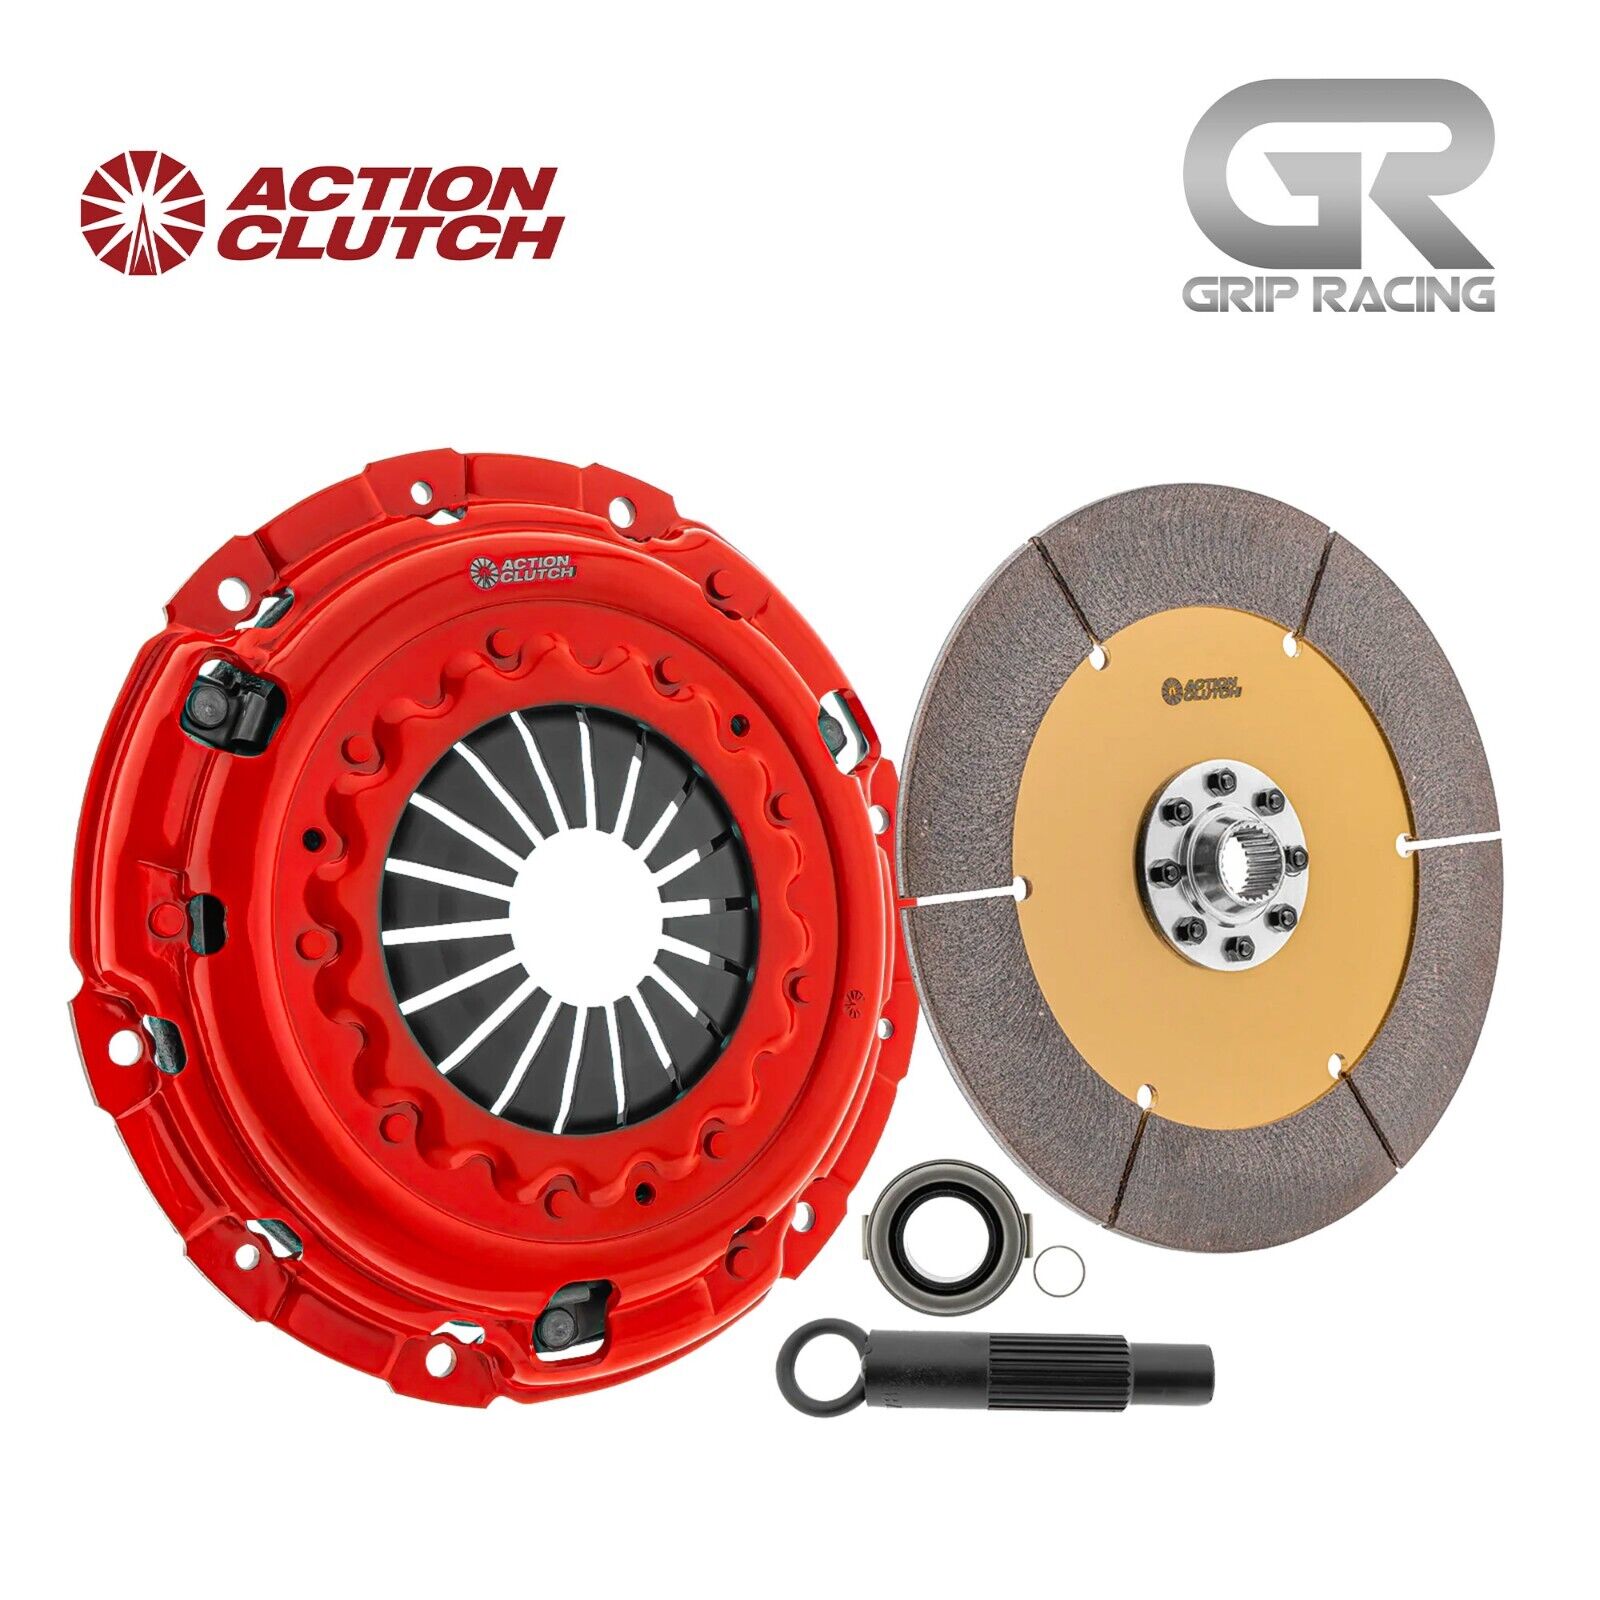 AC Ironman Unsprung Clutch Kit For Mazda MazdaSPEED Protege 2003 2.0L DOHC Turbo